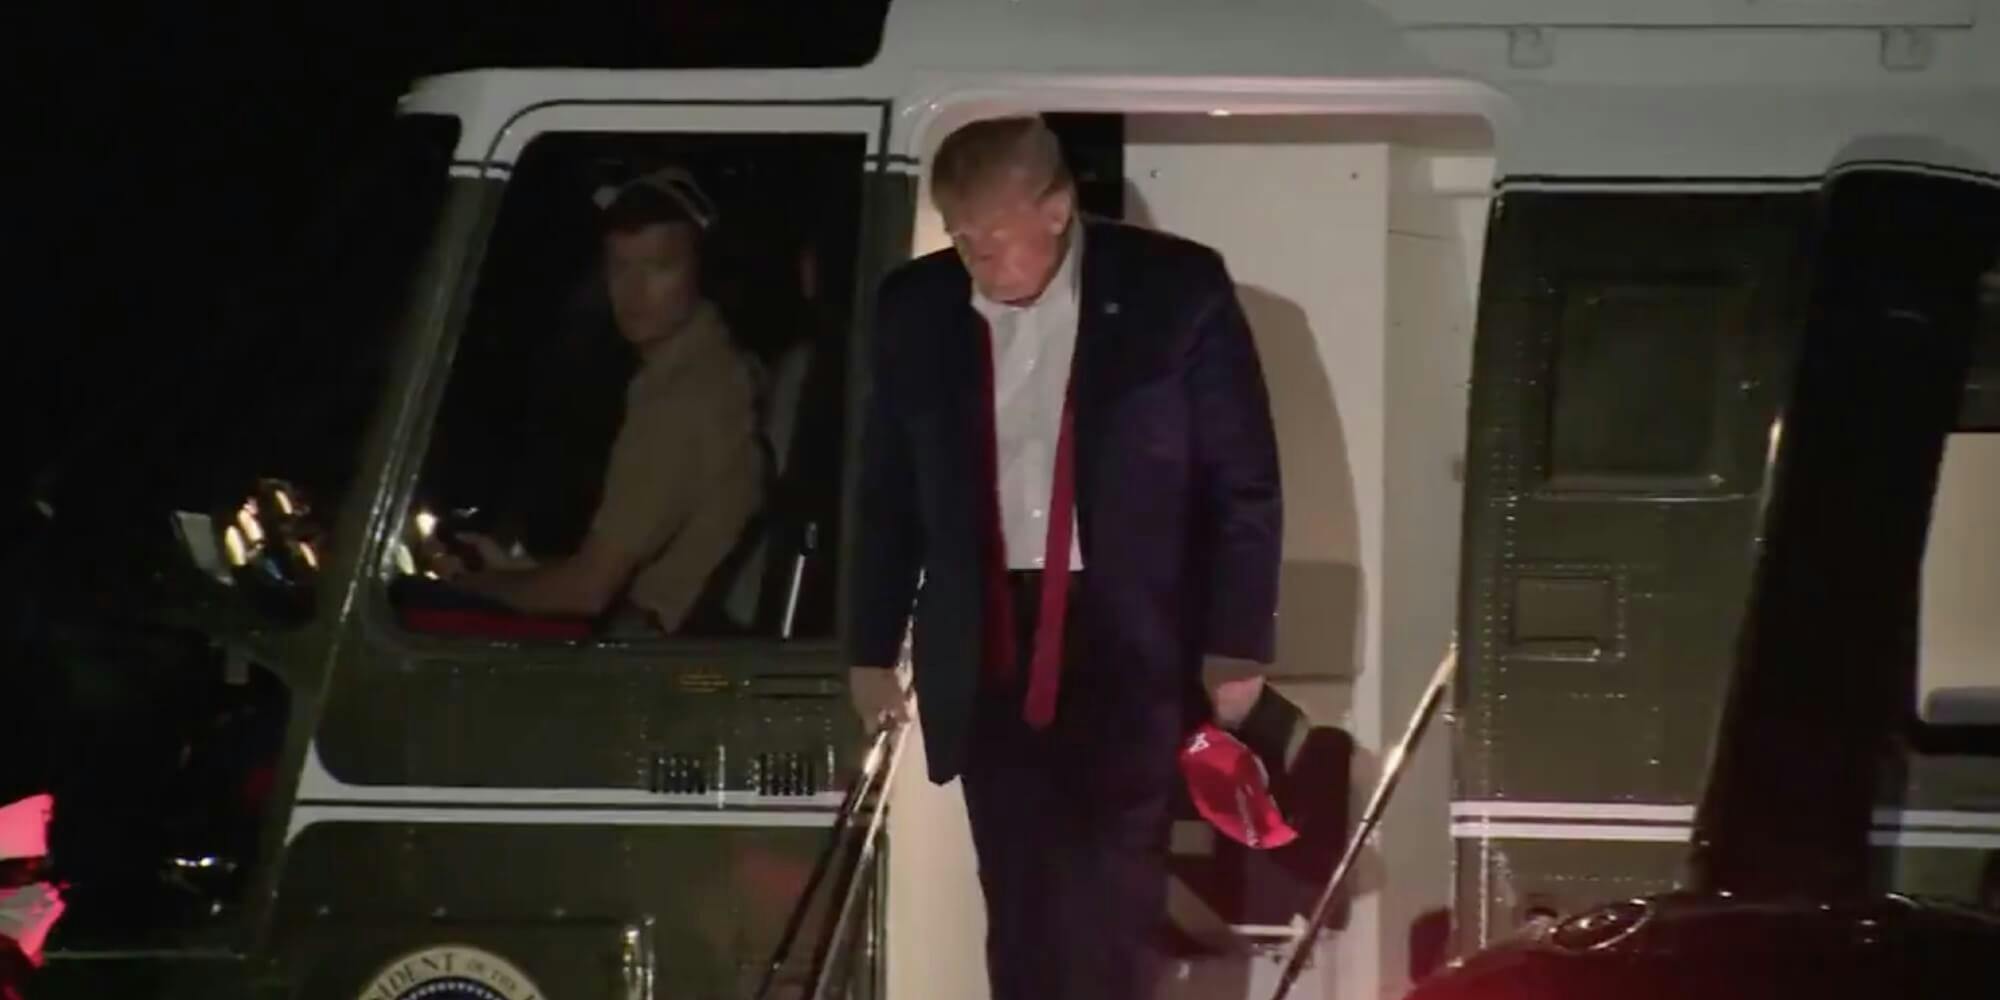 Trump leaving Marine One with his tie untied